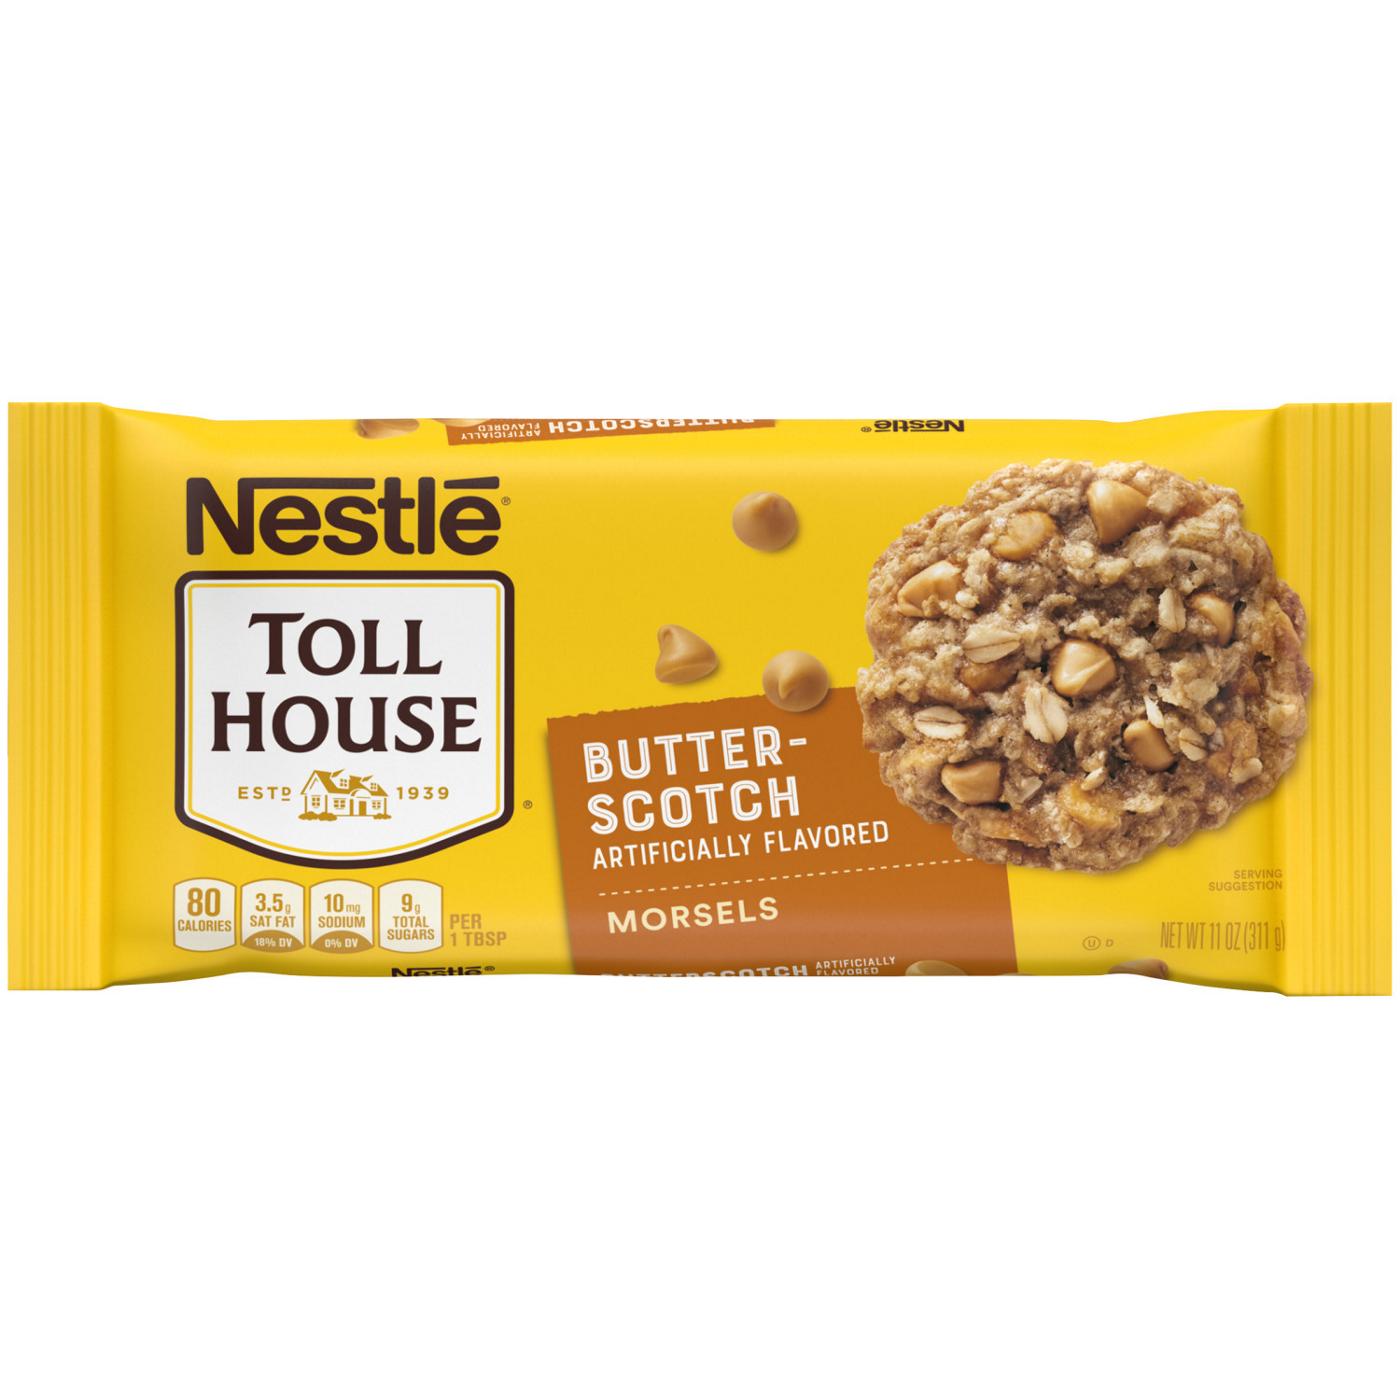 Nestle Toll House Butterscotch Flavored Morsels; image 1 of 4